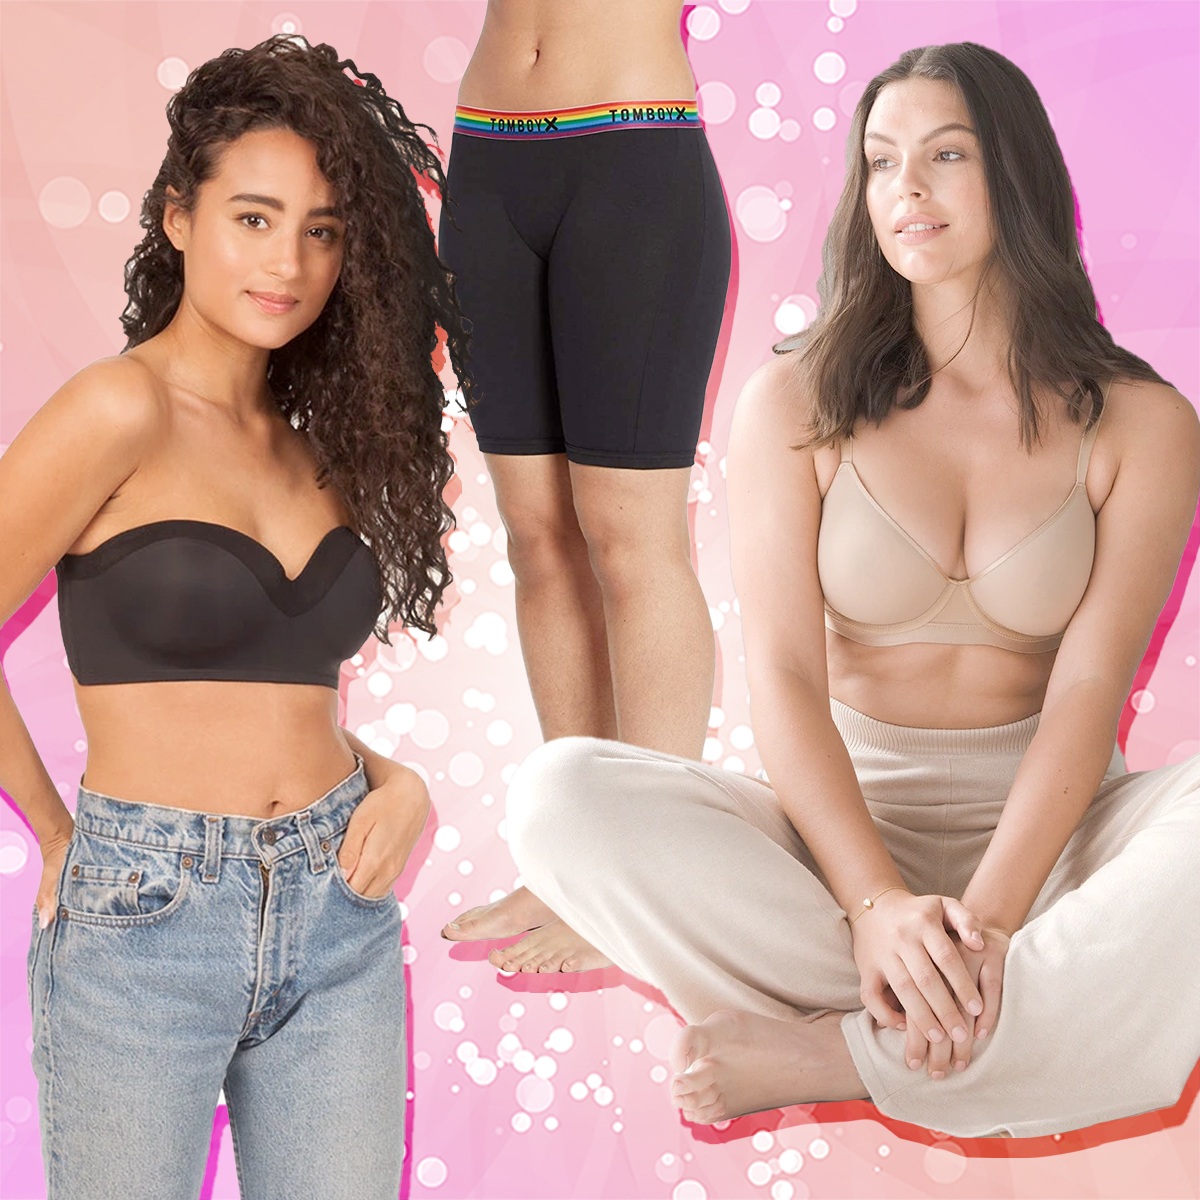 Soma Intimates - 2 steps to smooth – all you need are Vanishing